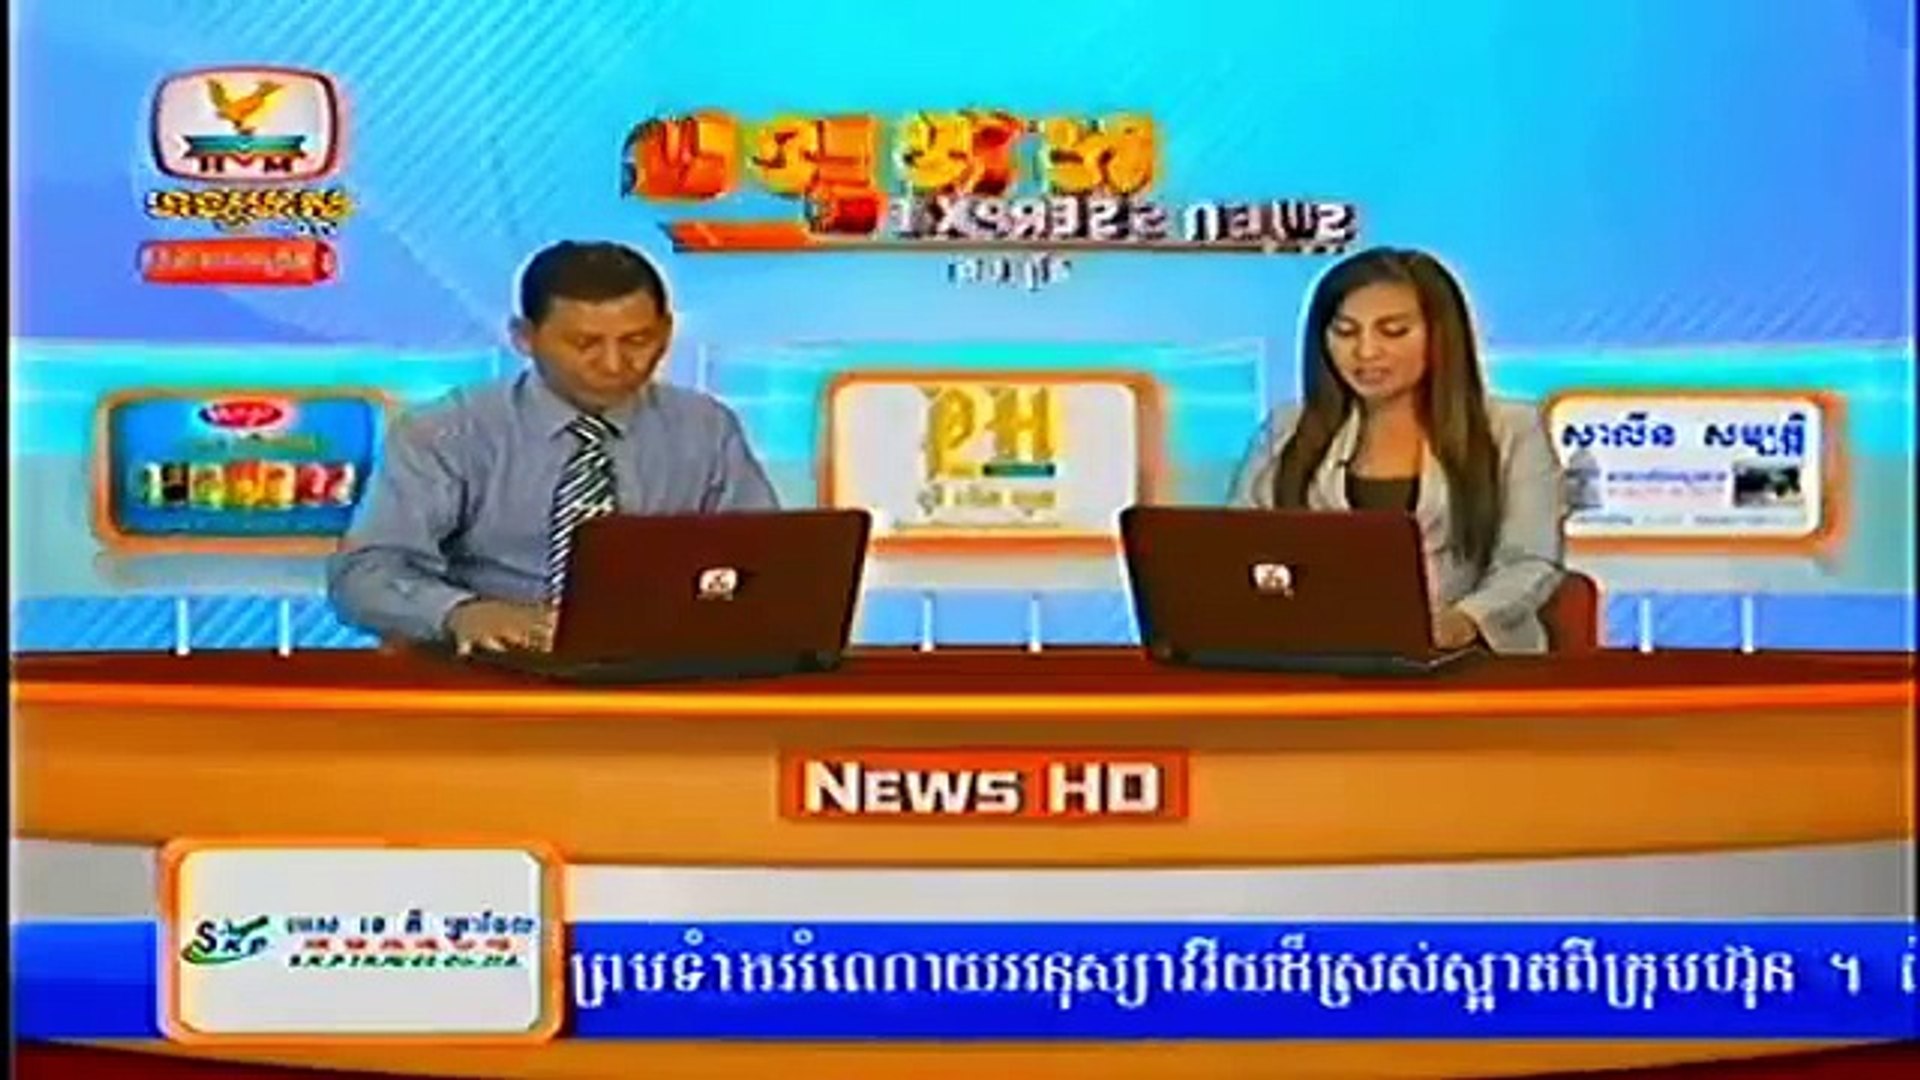 Hang Meas HDTV News 03 - video Dailymotion